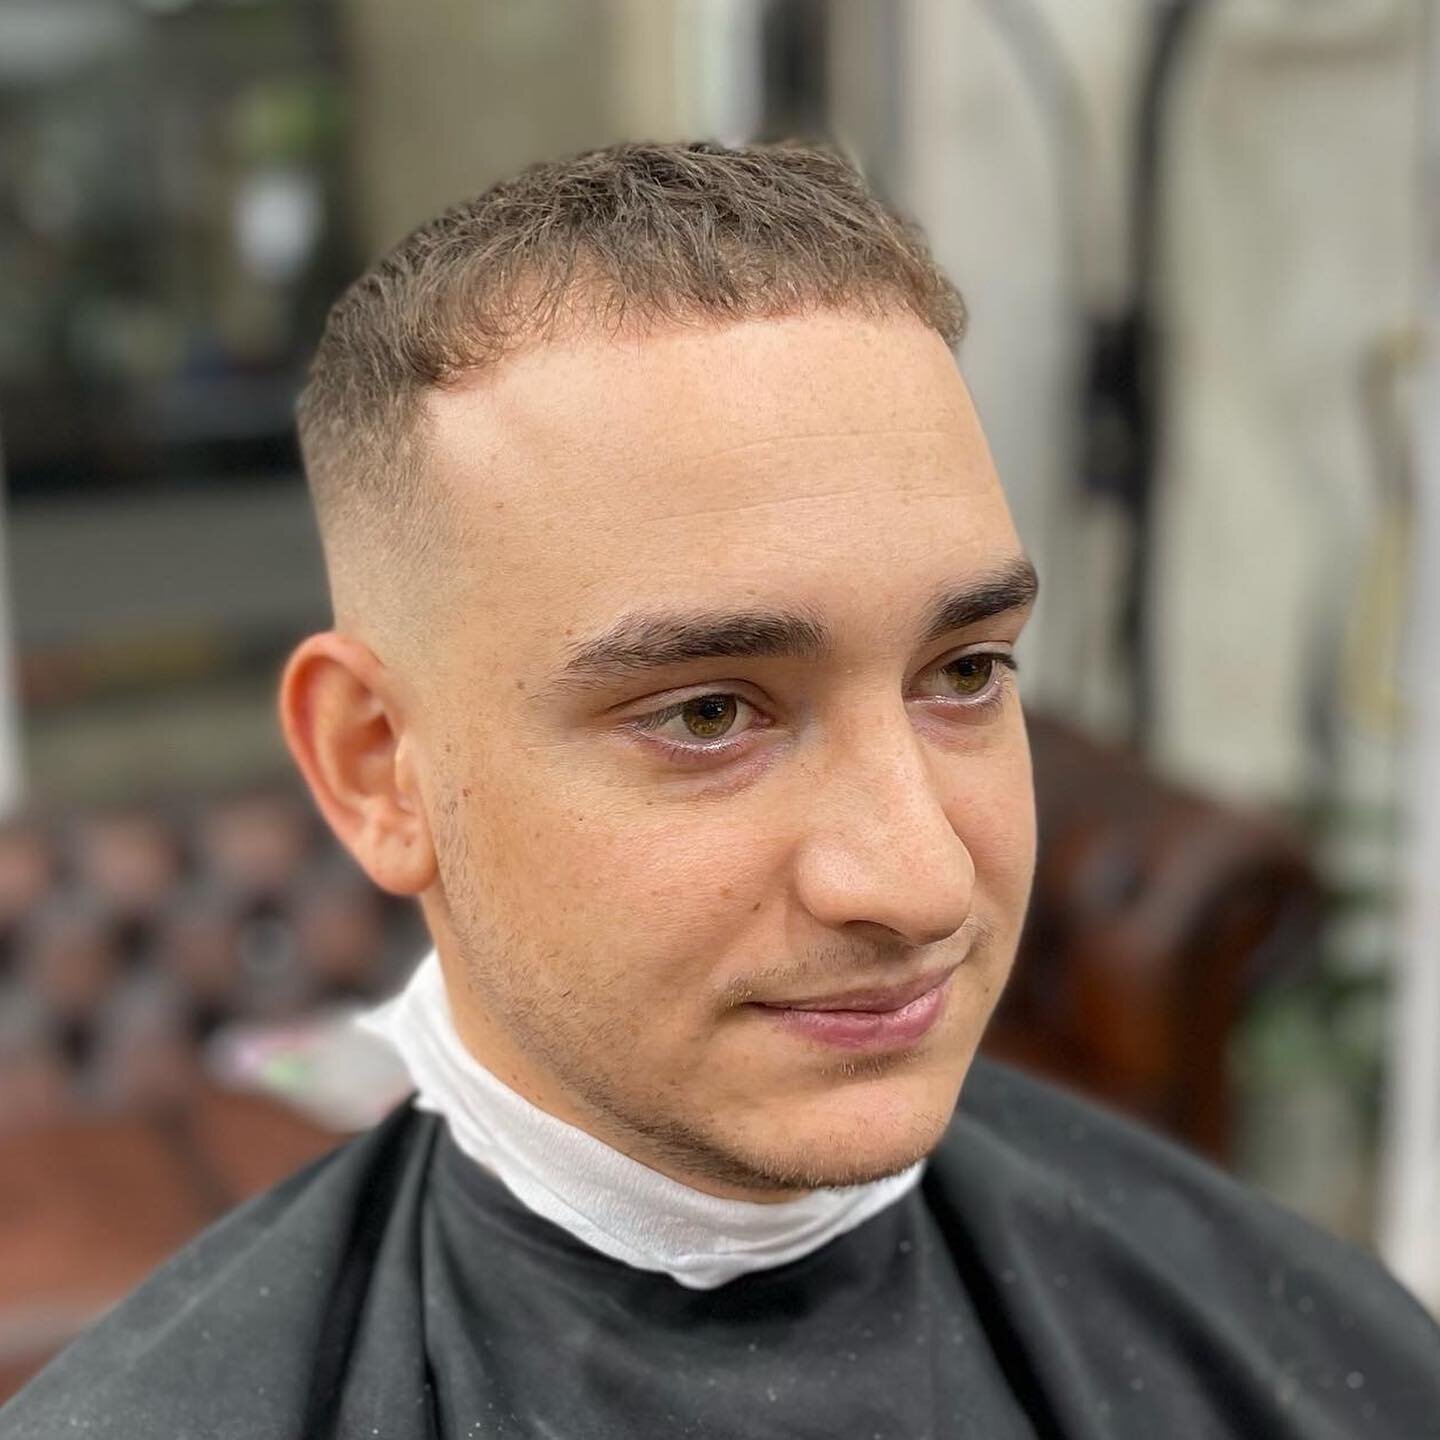 A good hair cut change the way you look 🔥

The way you cut your hair can put emphasis on certain features which can balance out your face and change your appearance. 

Head to our bio to book in your next cut - book in early to make sure you don't m